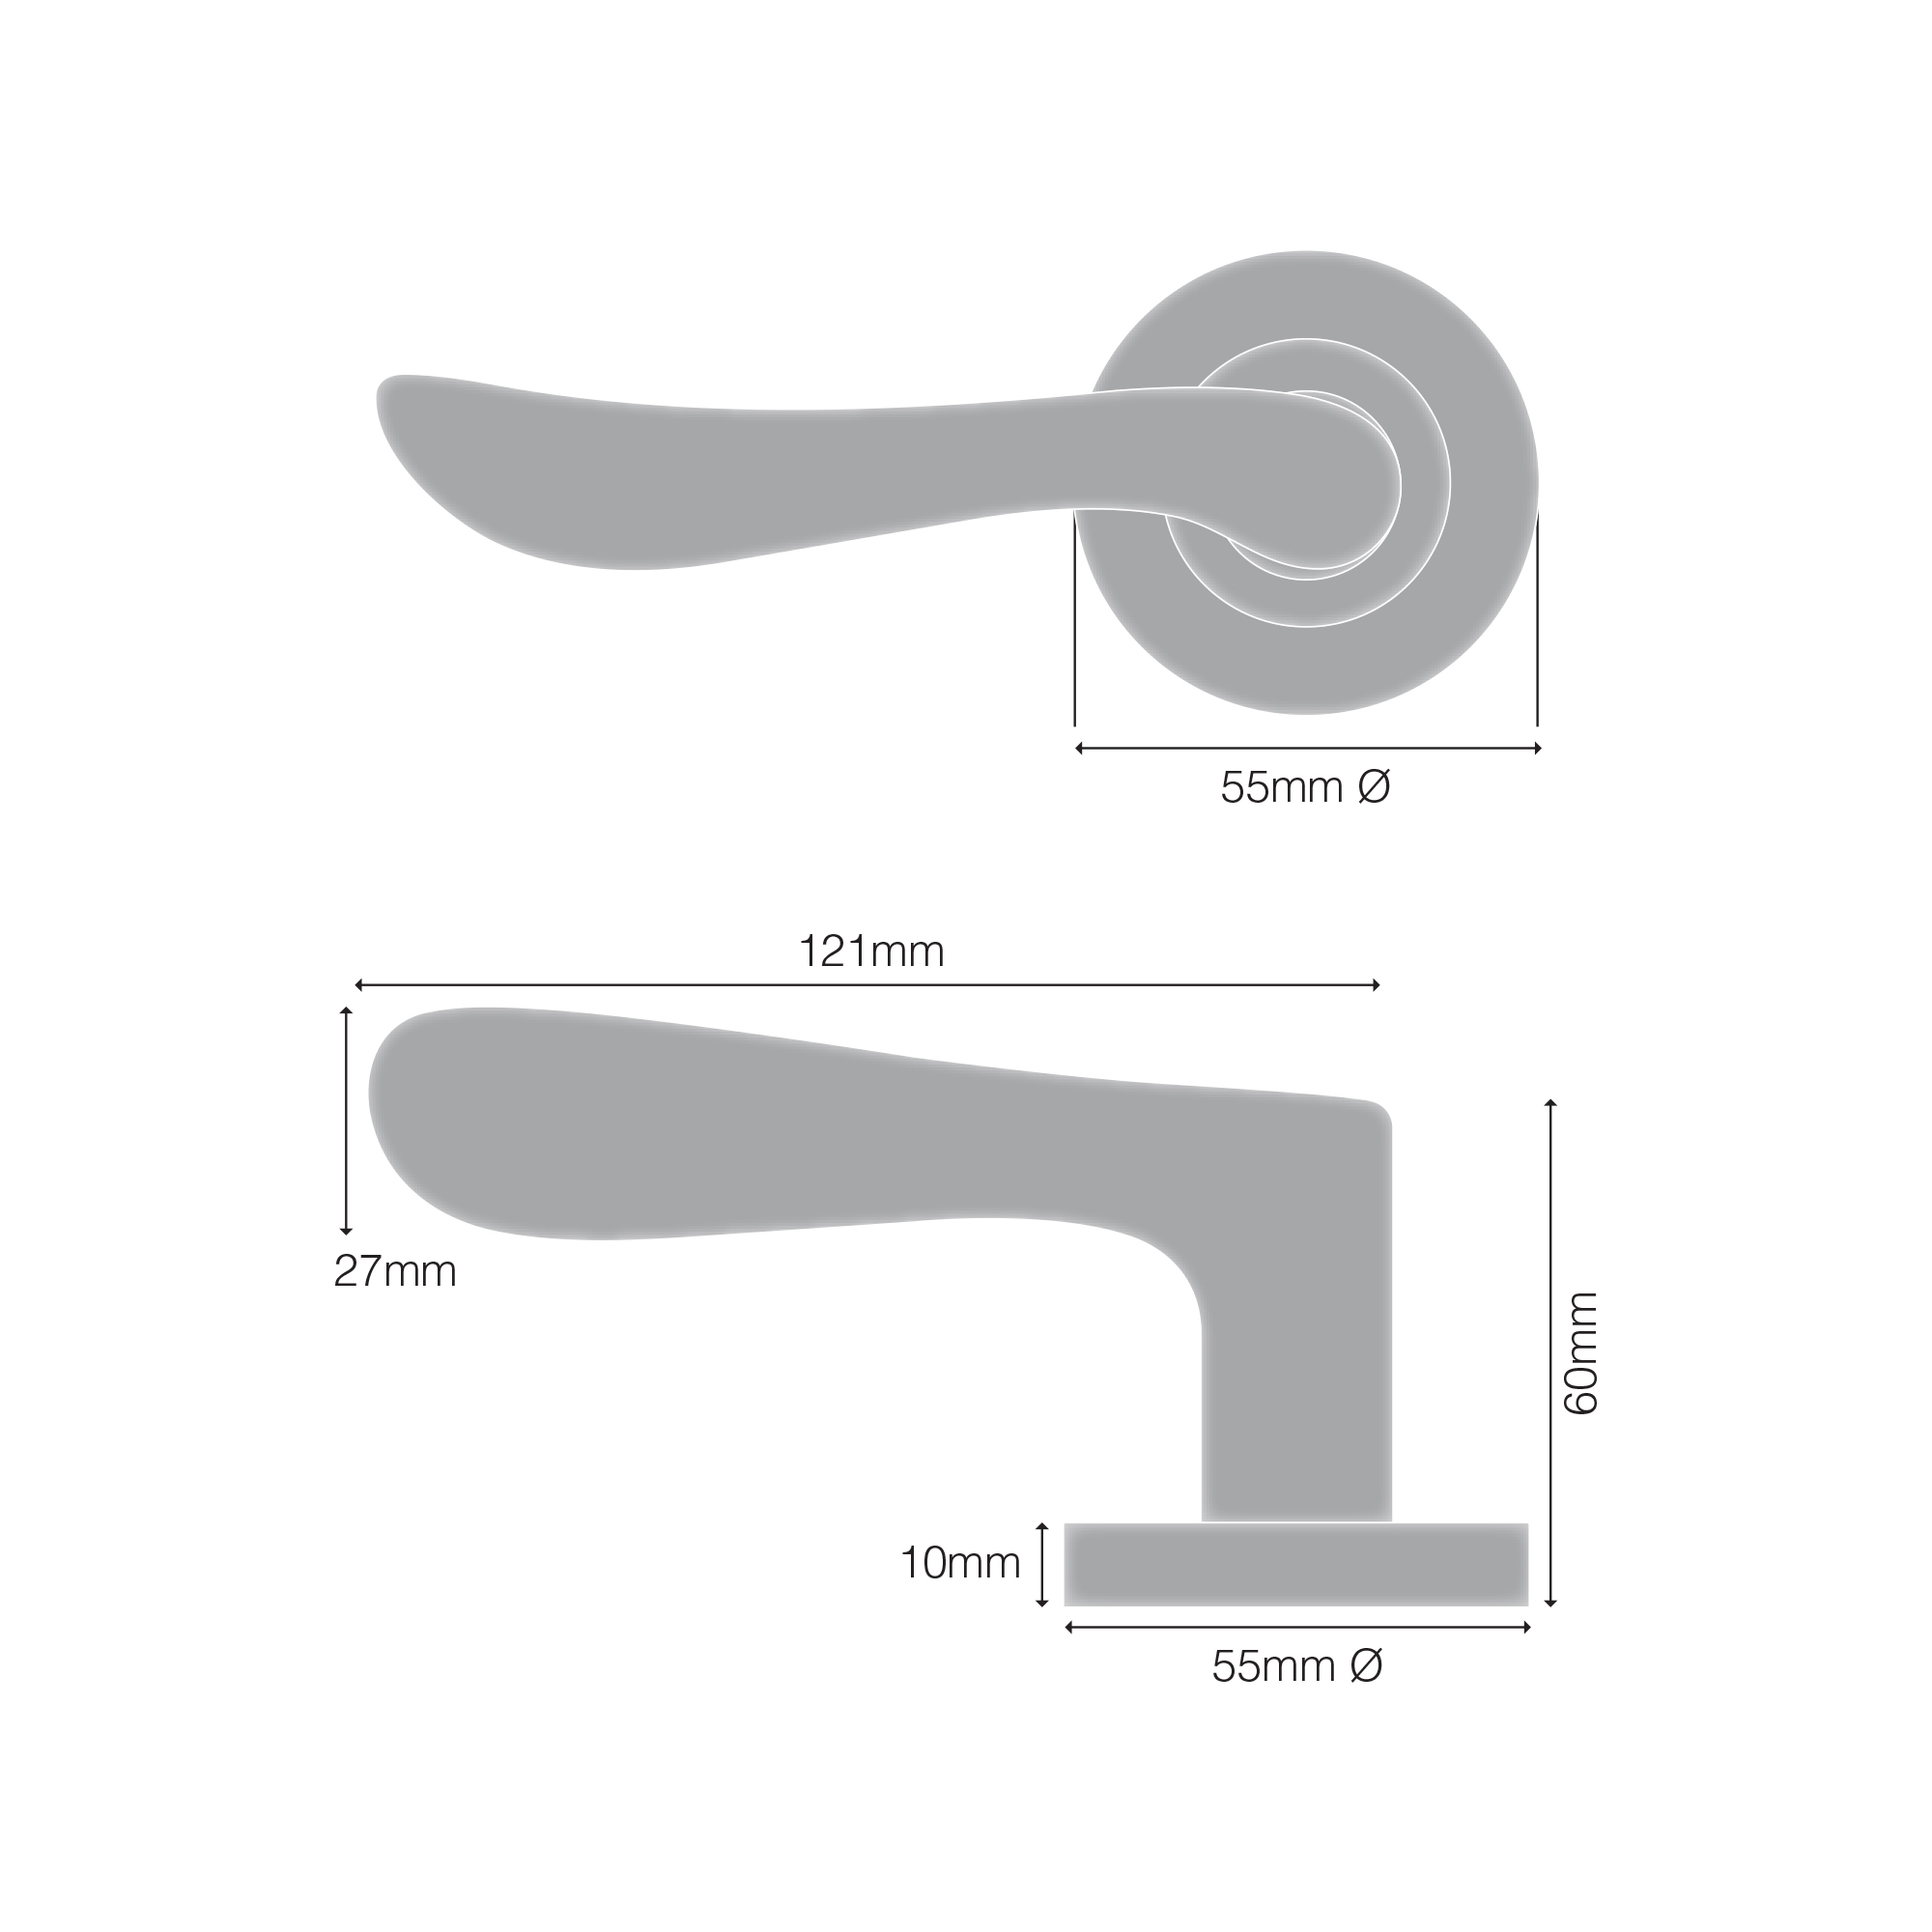 Juno Round Rose Product Dimensions 2000x2000px